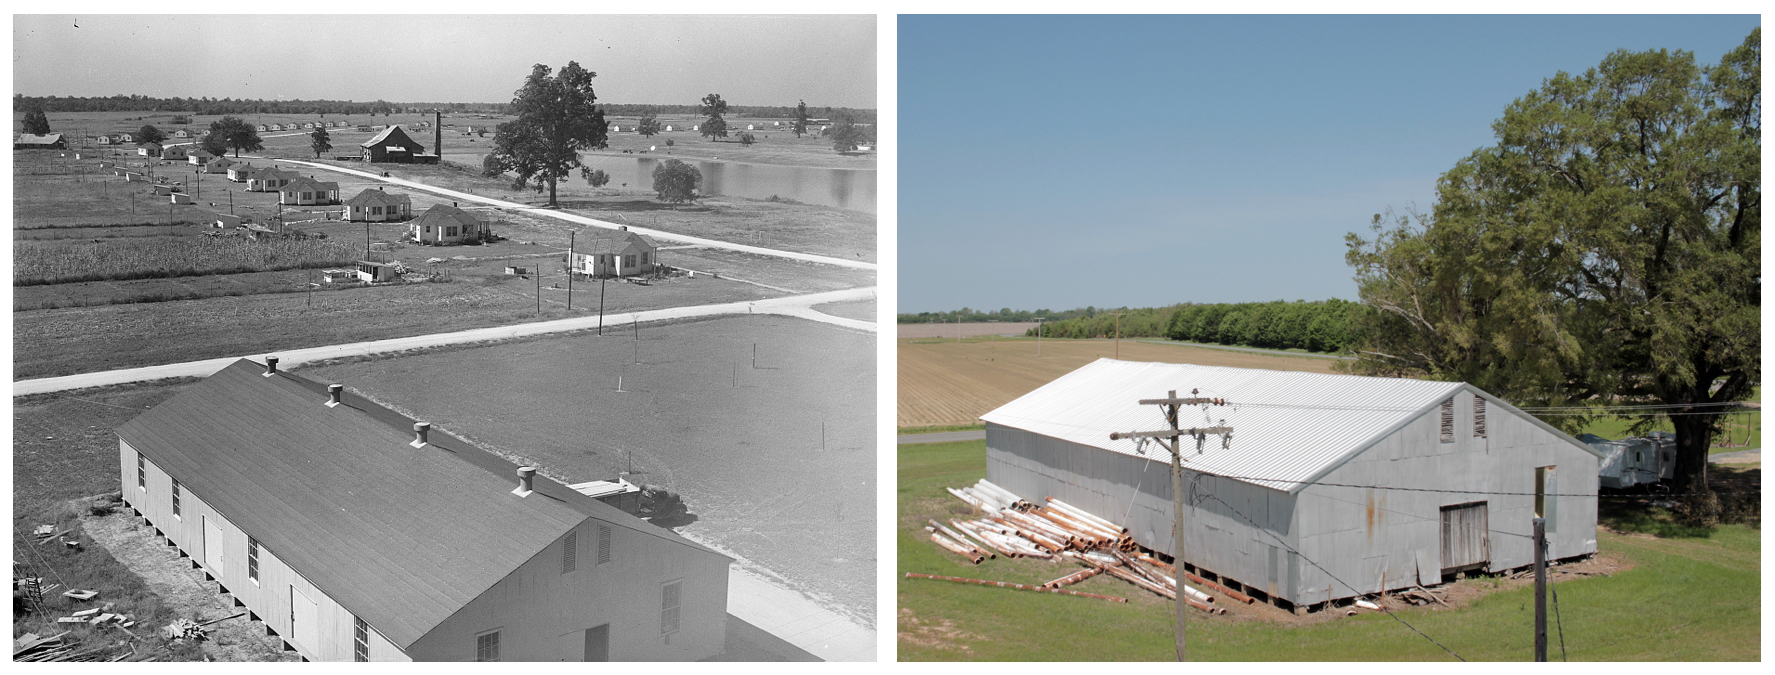  Left: Panoramic view of Lake Dick Project, 1938. Russell Lee.  Right: Panoramic view near Lake Dick, 2018. James Matthews.  I was unwilling to climb any higher up the old water tower, but apparently Russell Lee was more fearless. His photo appears t